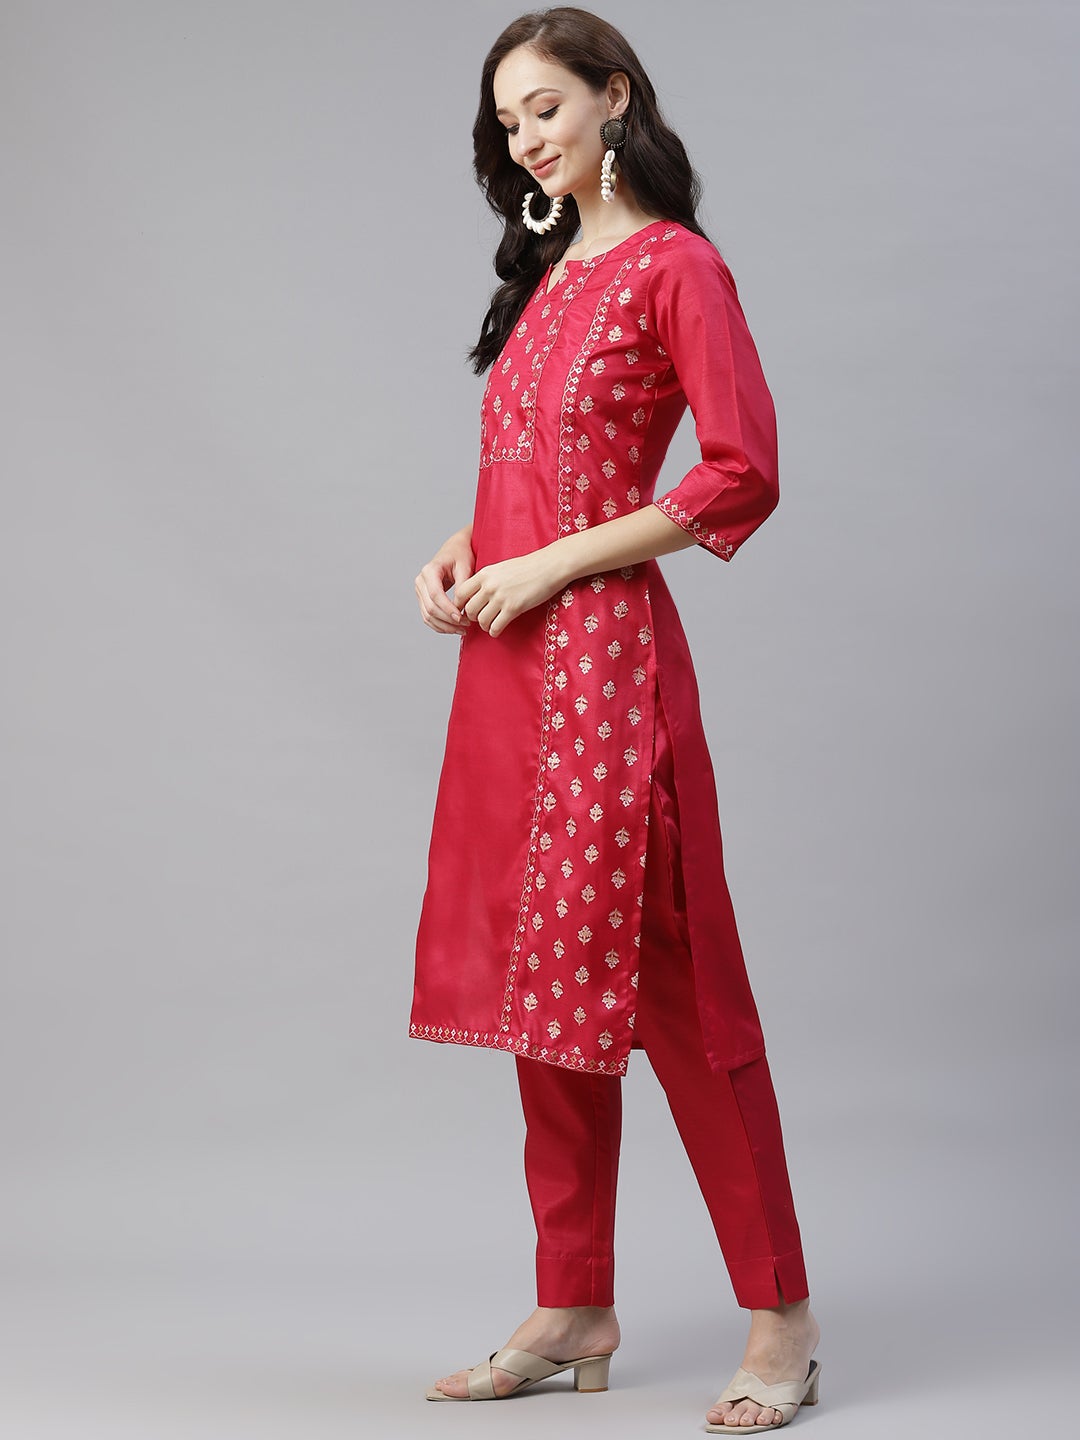 Mindhal Women's Pink Color Foil Printed Straight Kurta And Pant Set